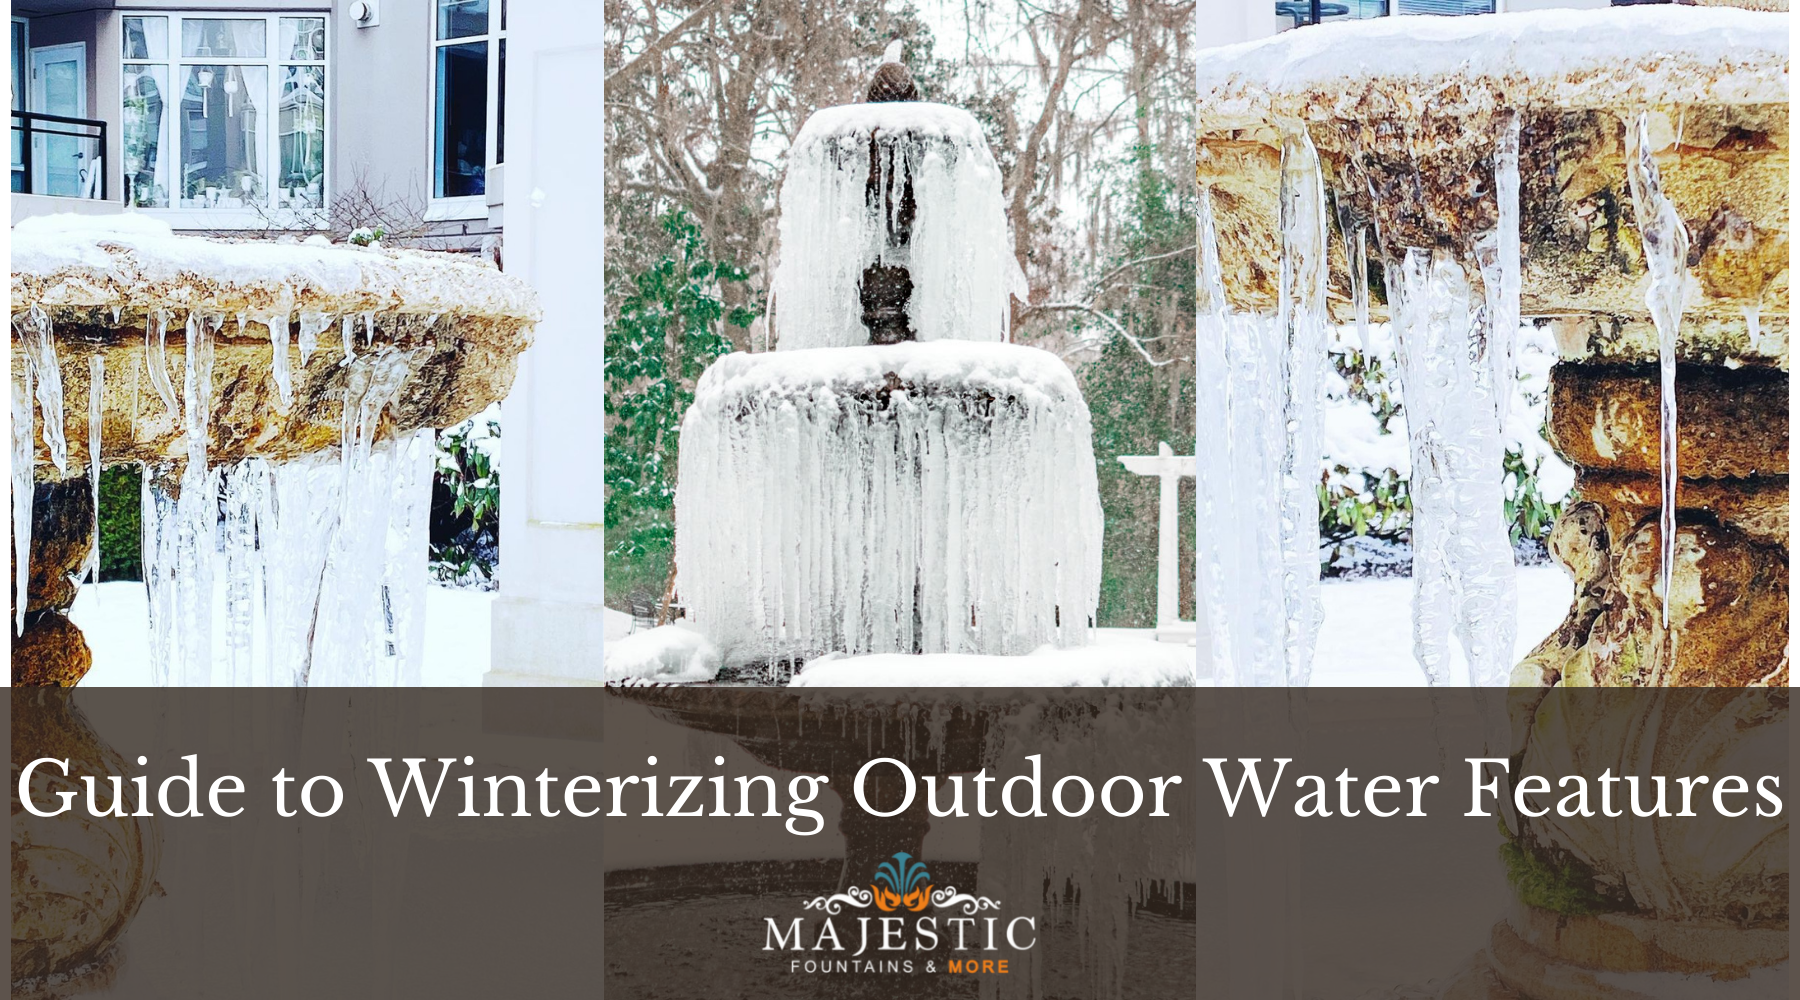 User Guide to Winterize Outdoor Water Features